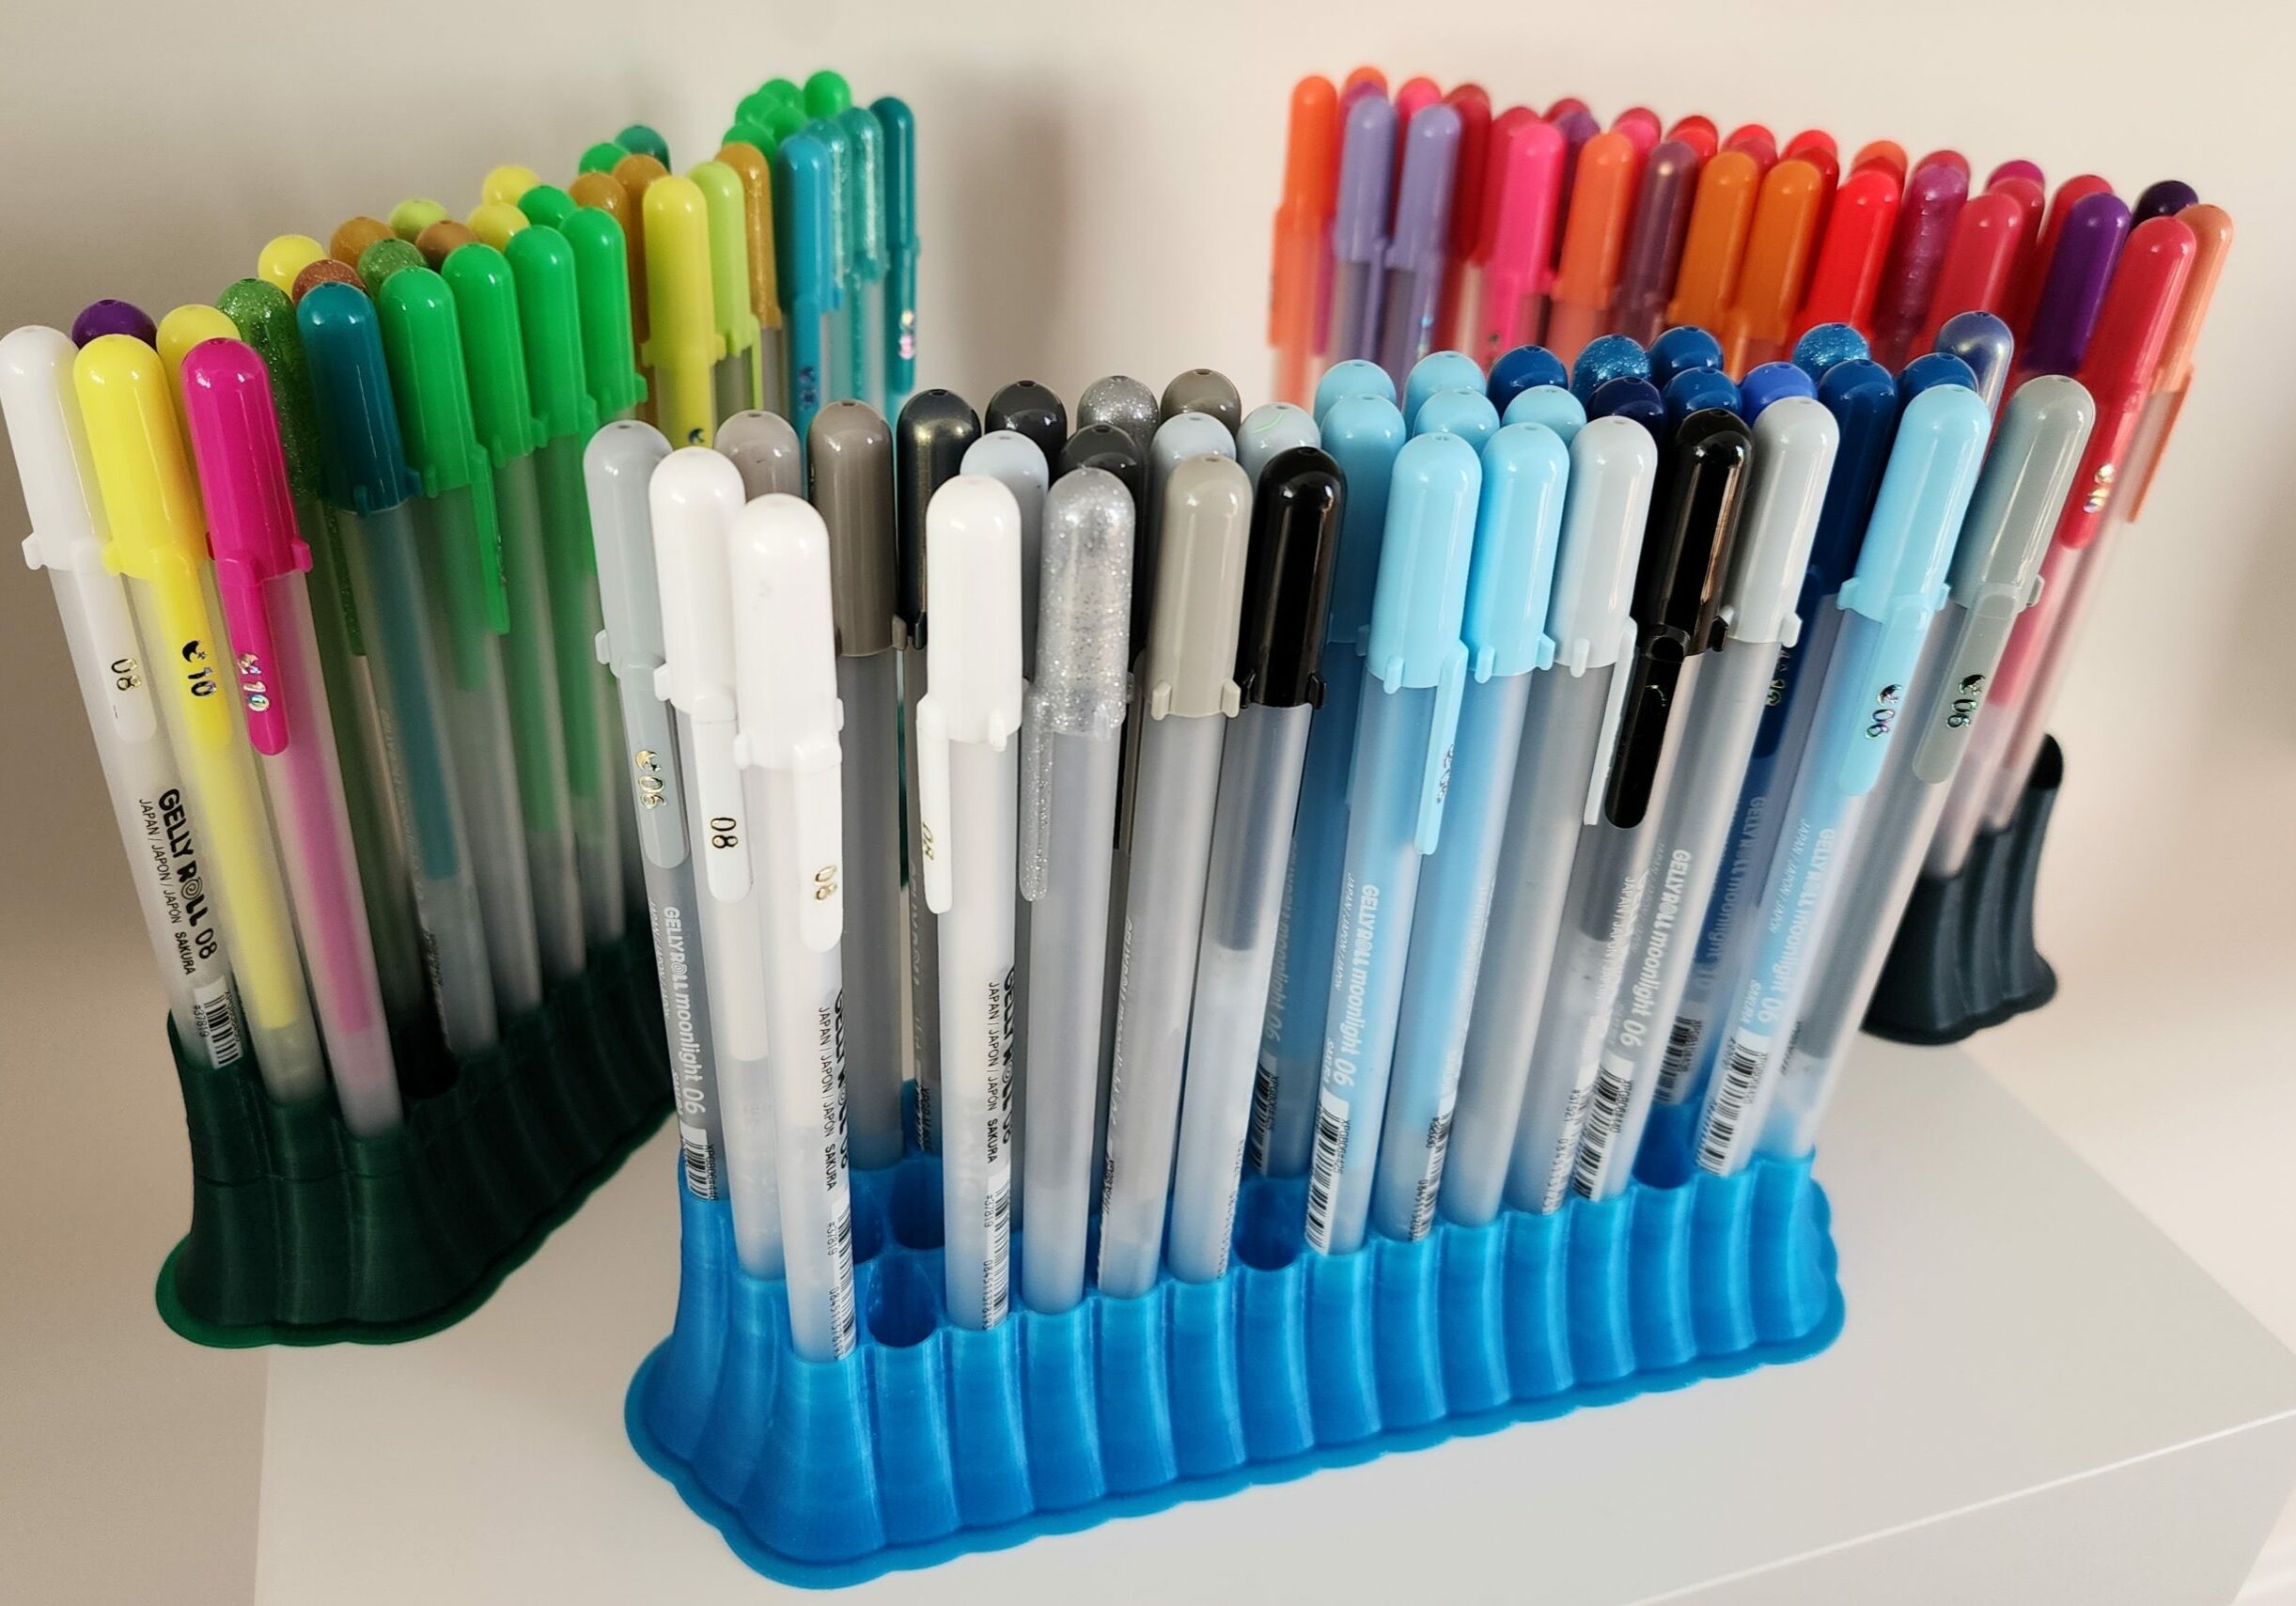 Gelly Roll Pens in 3D printed pen holders that allow you to see many colors at once.